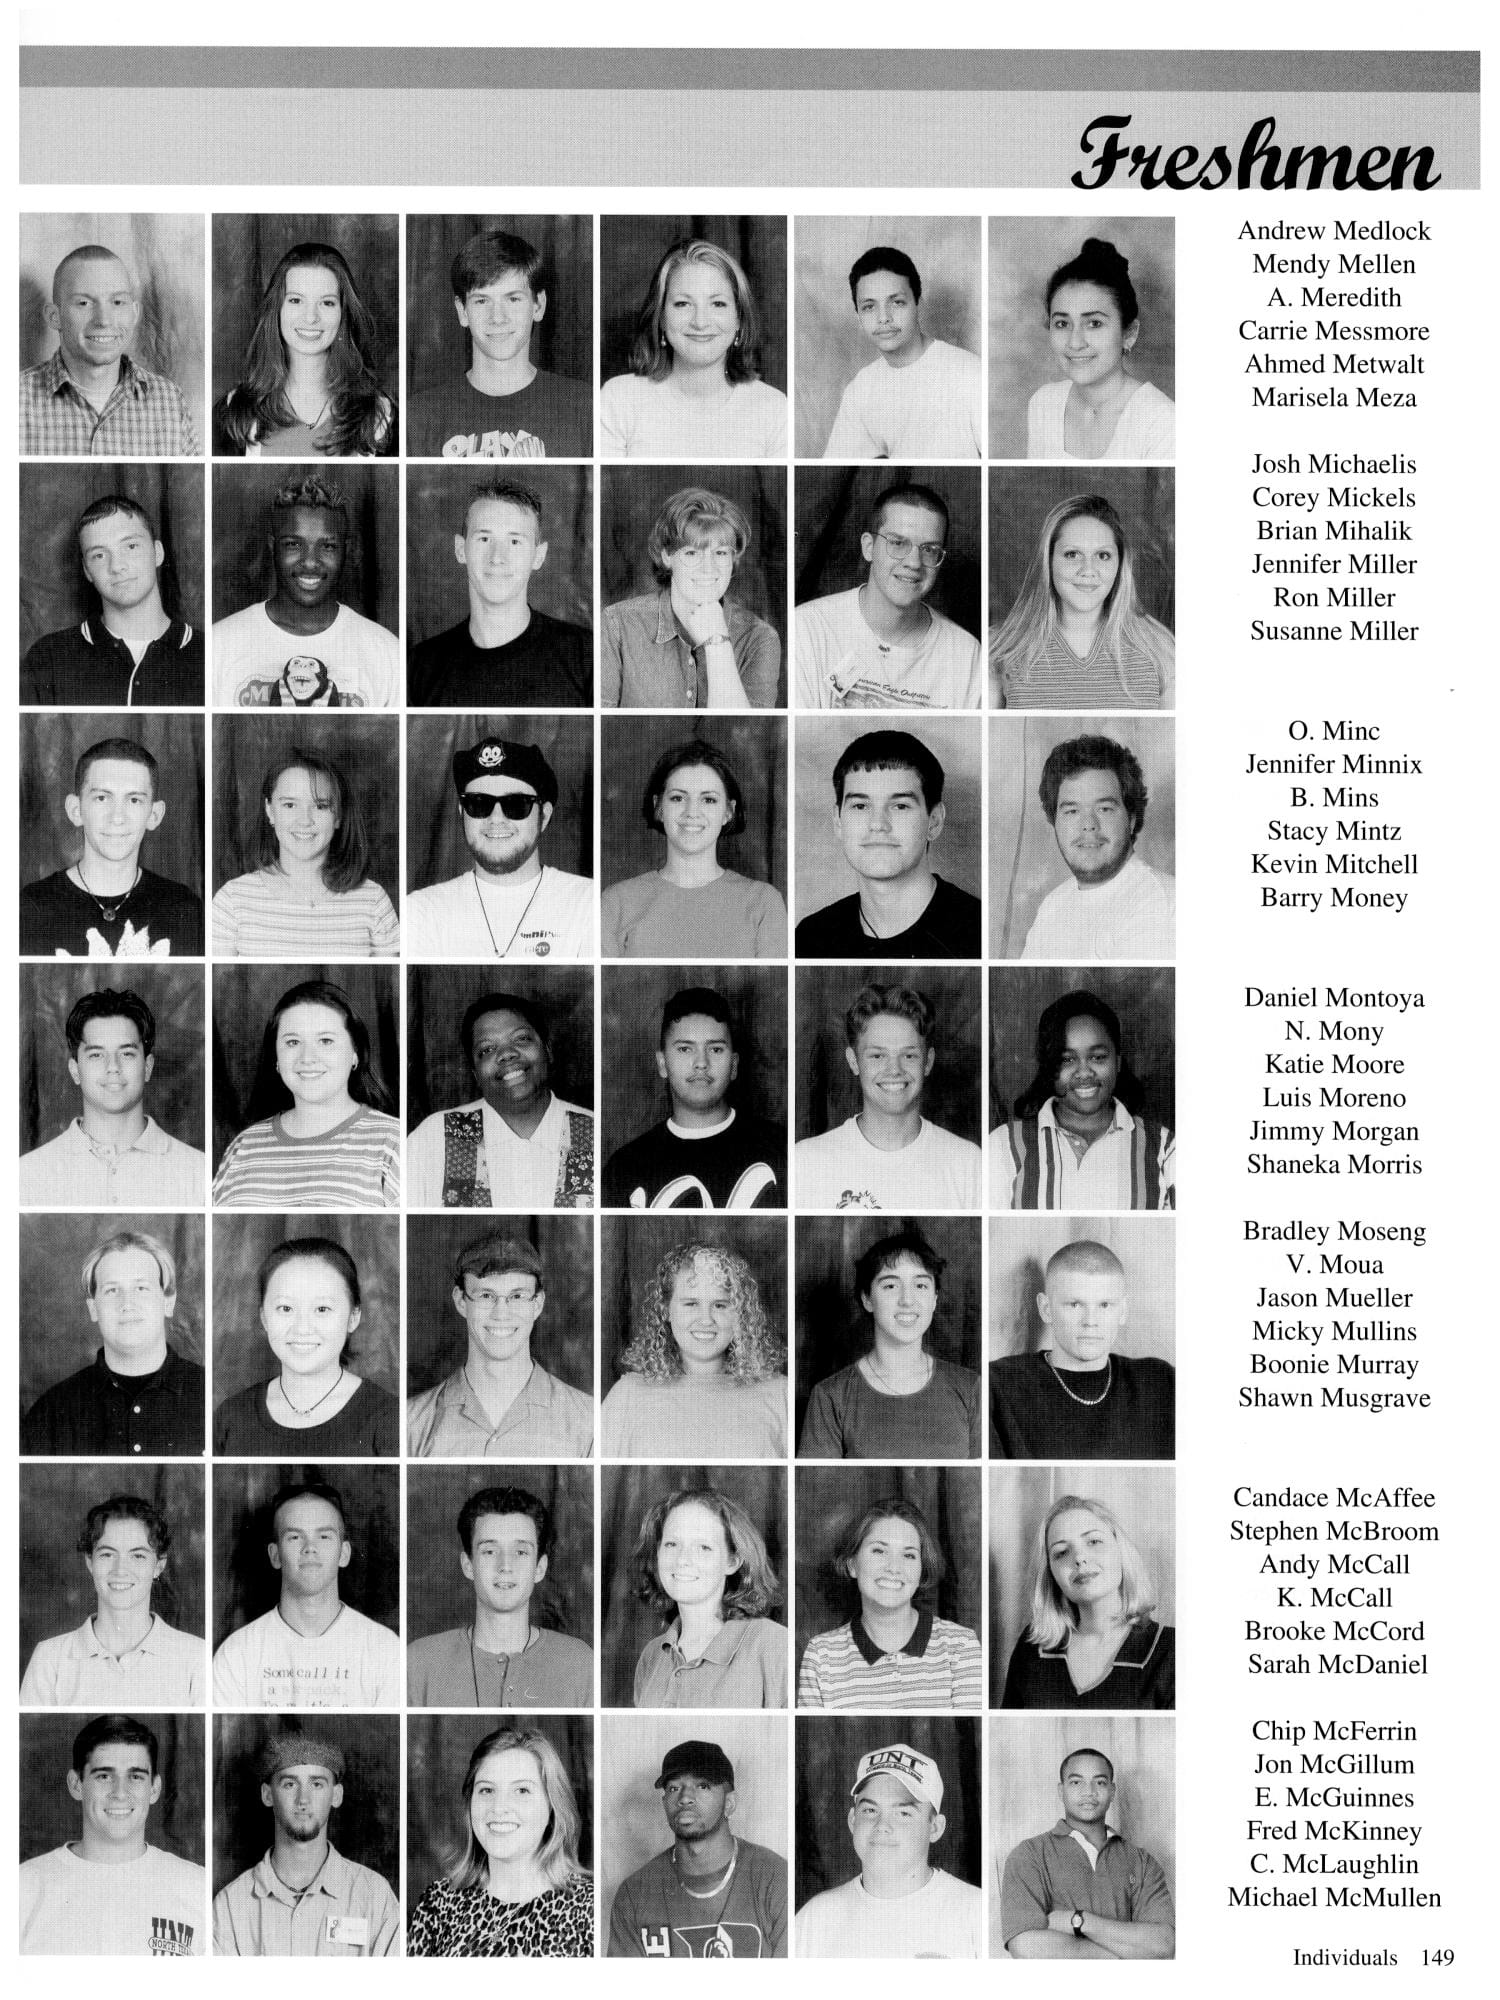 Scan of a page from UNT's 1997 yearbook which featured Corey Mickels